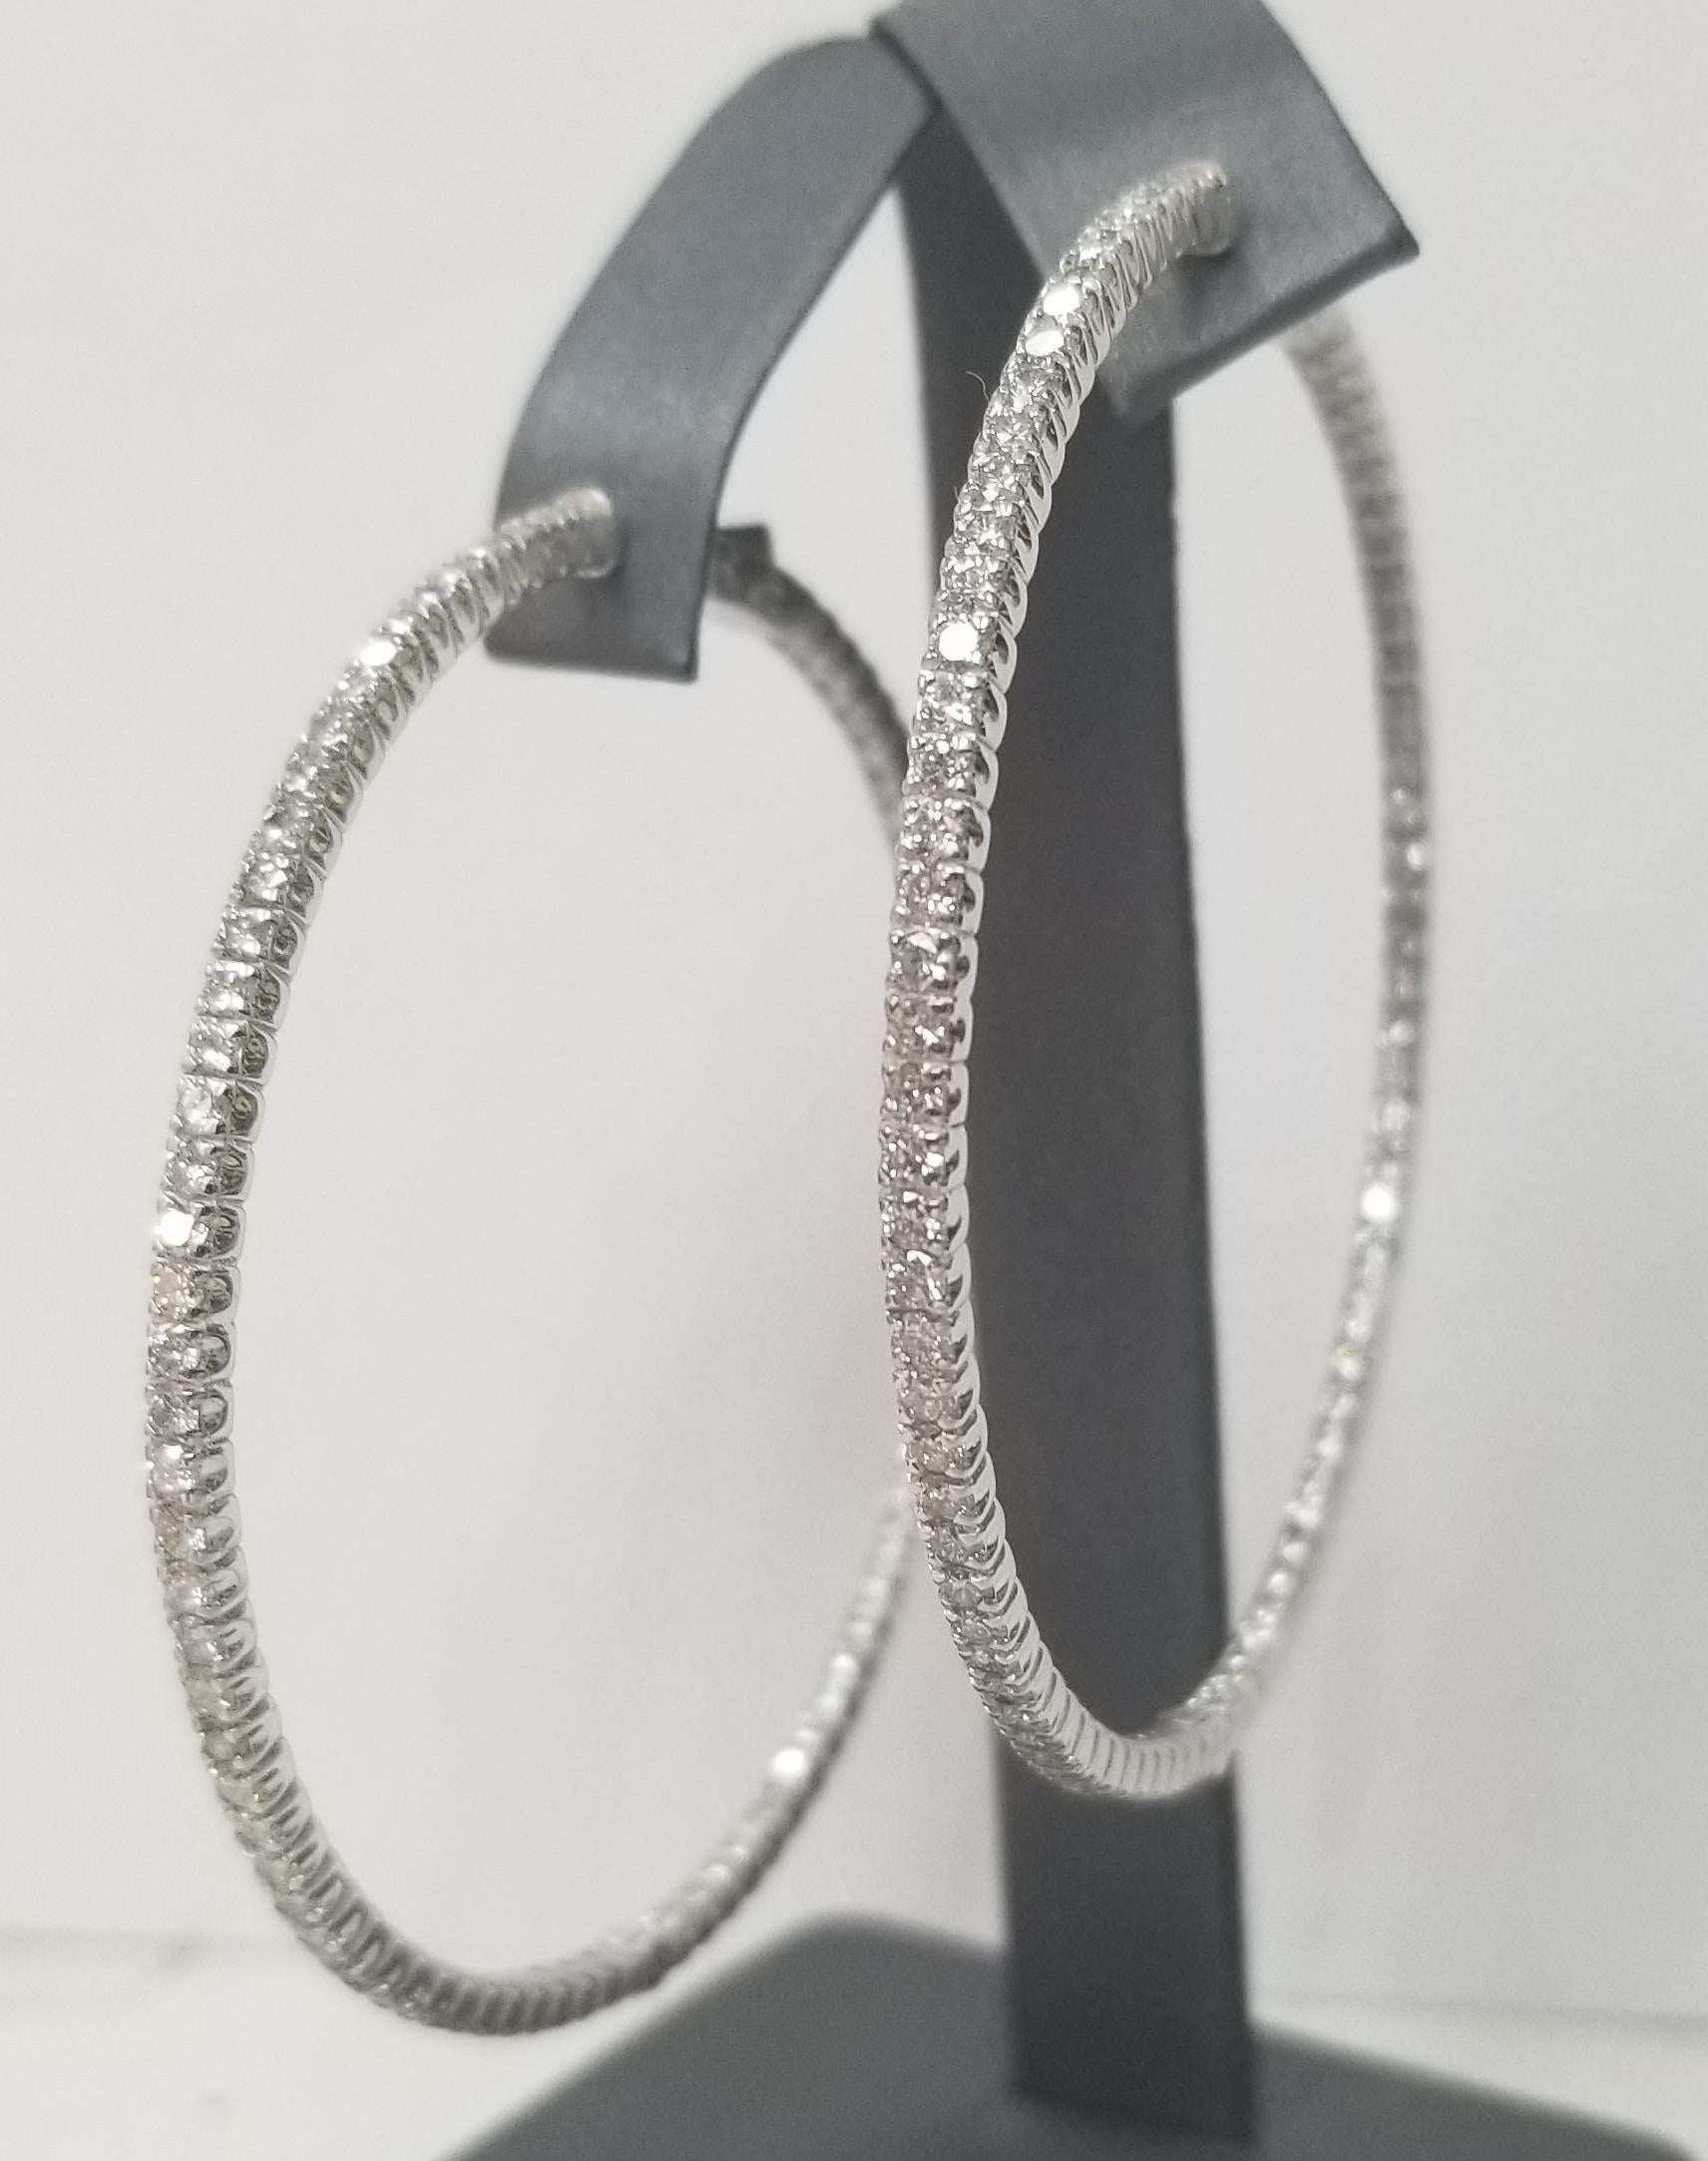 About
14k white gold large 2 1/2 inch in diameter diamond hoop earrings
Specifications:
    main stone: 166 round Diamonds    
    carat total weight: 5.02CTW
    color: G
    clarity: VS
    metal: 14K WHITE GOLD
    type: HOOP EARRINGS
    weight: